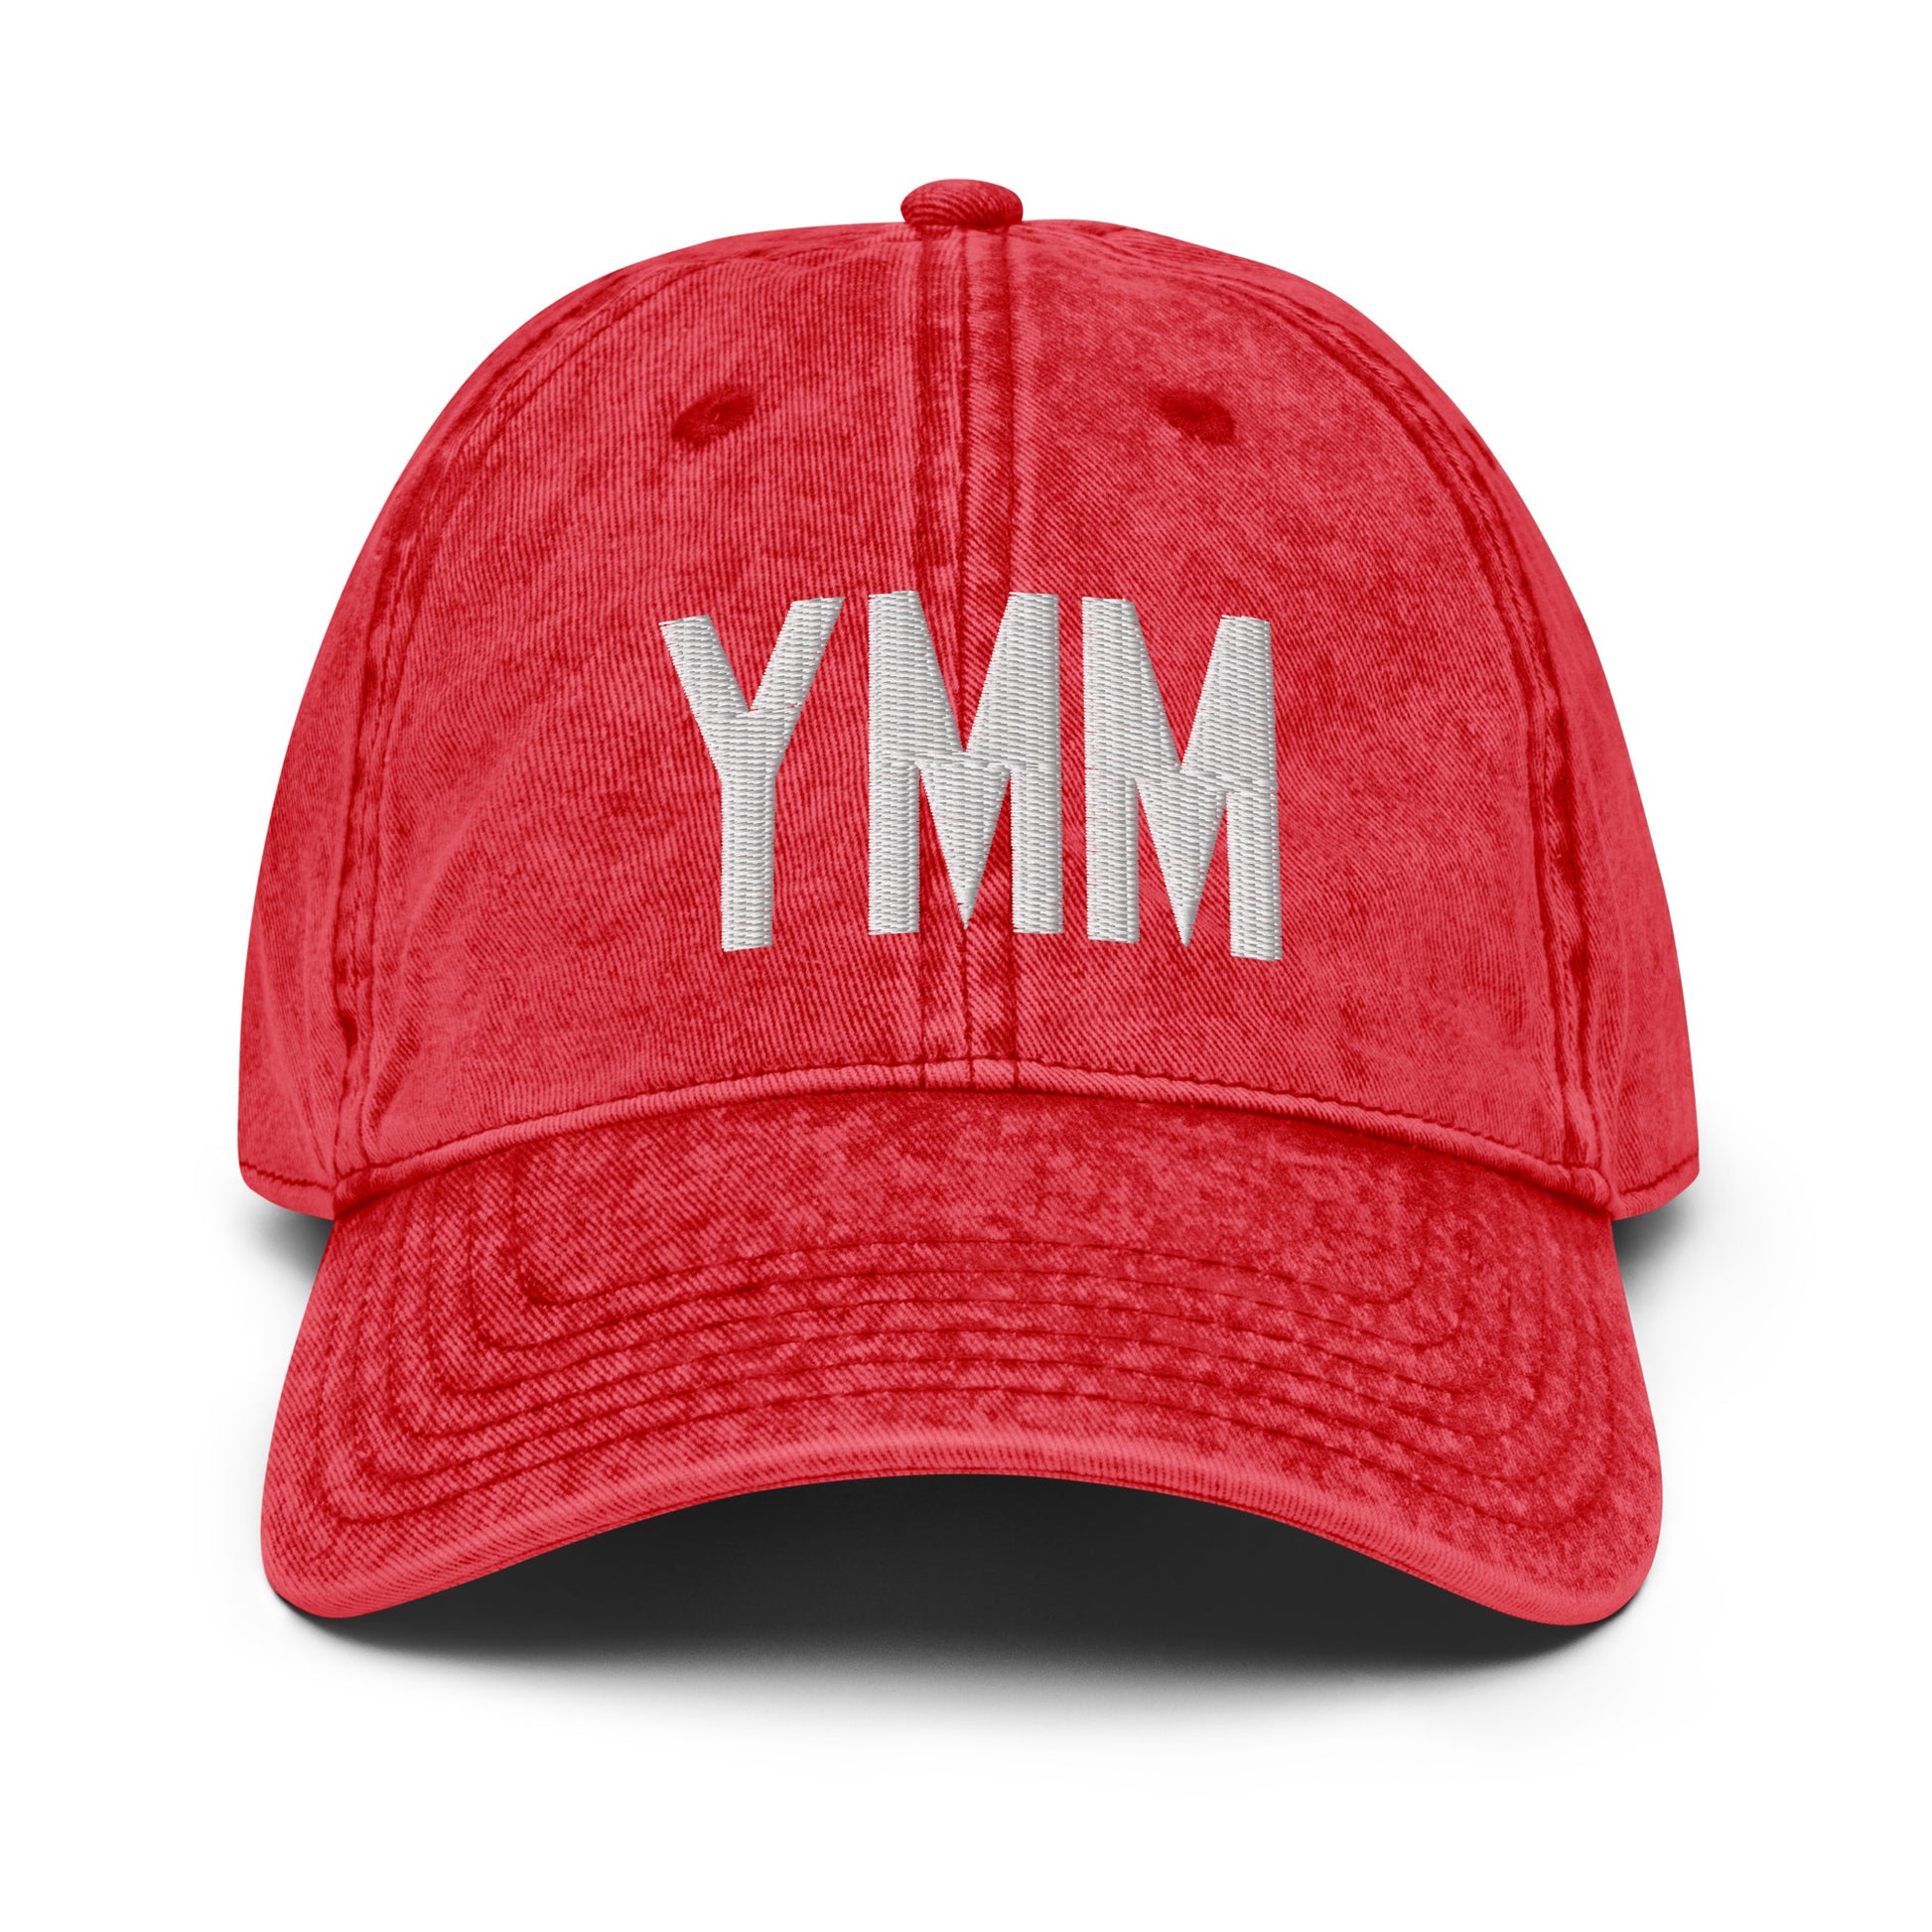 Airport Code Twill Cap - White • YMM Fort McMurray • YHM Designs - Image 22